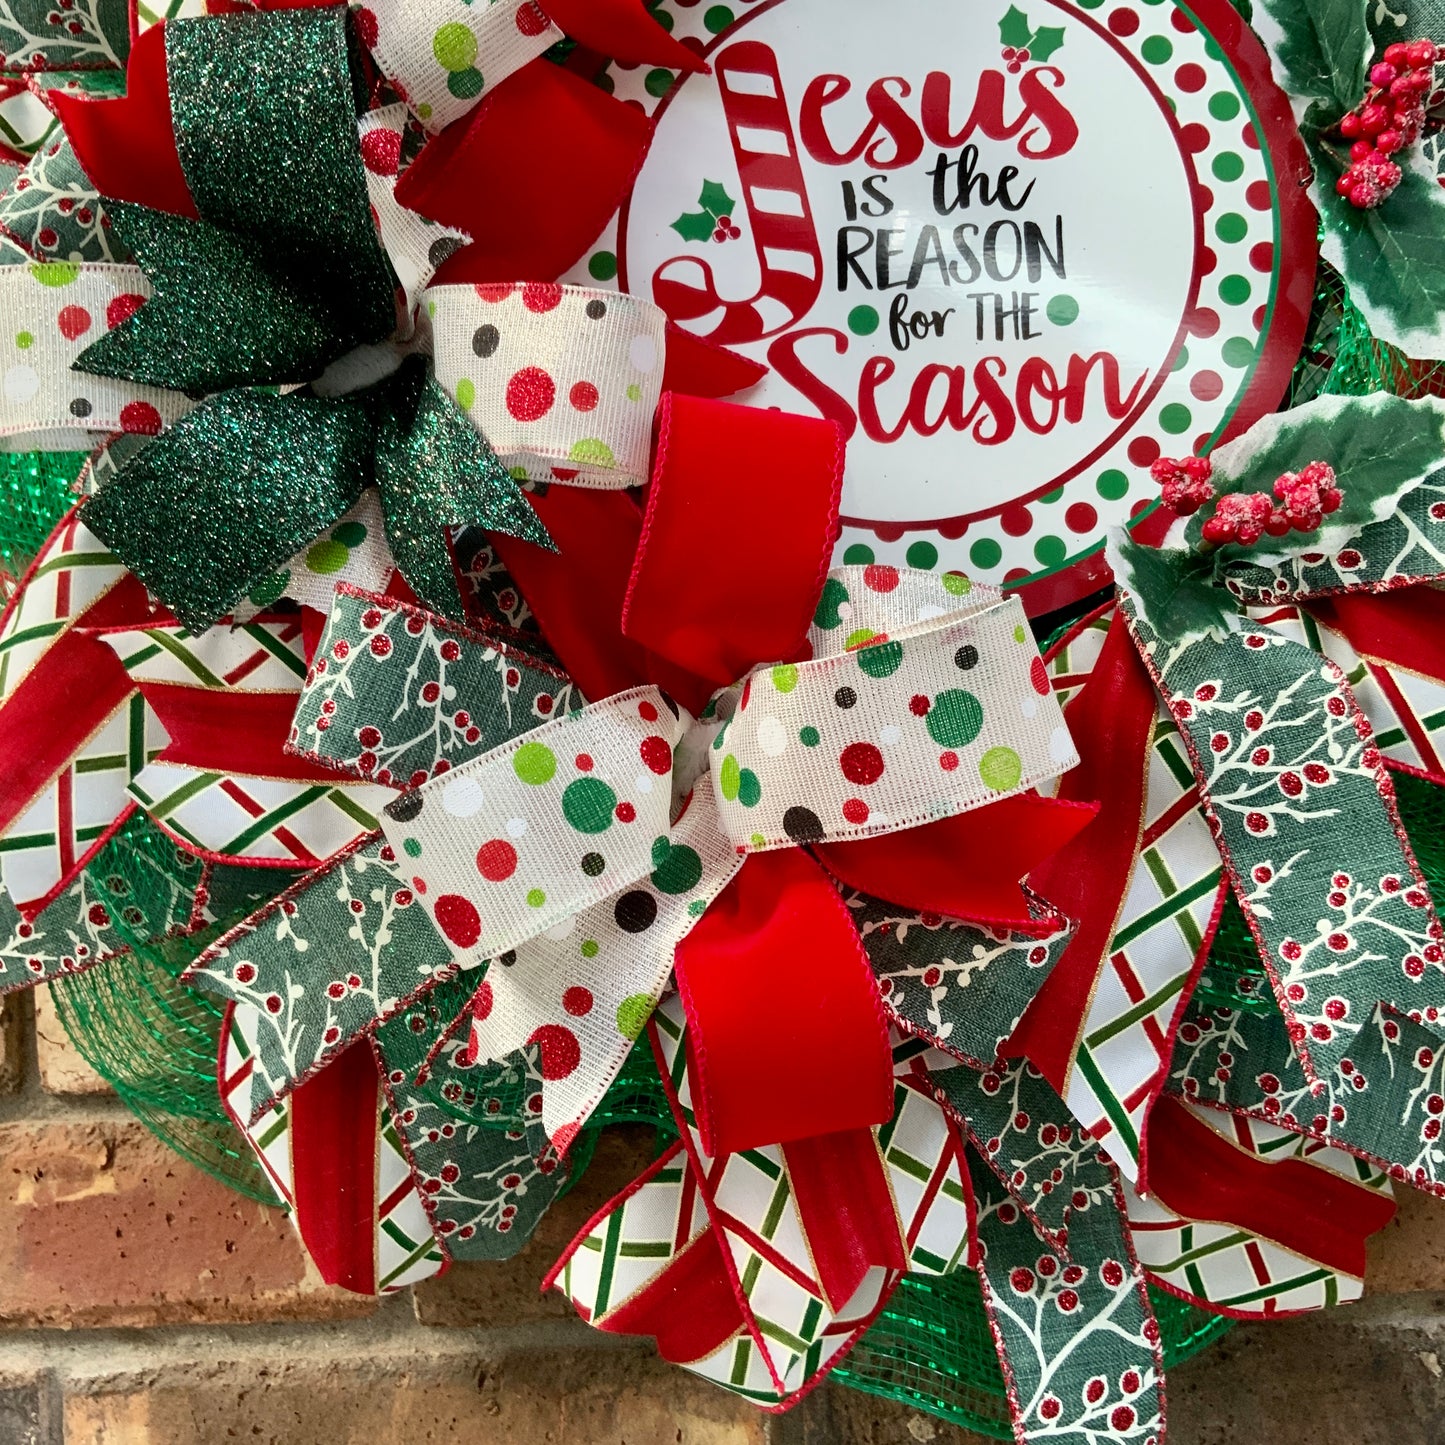 Jesus Is The Reason For The Season Wreath, Christmas Wreath, Christmas Pancake Wreath, Traditional Christmas Wreath, Religious Christmas Wreath